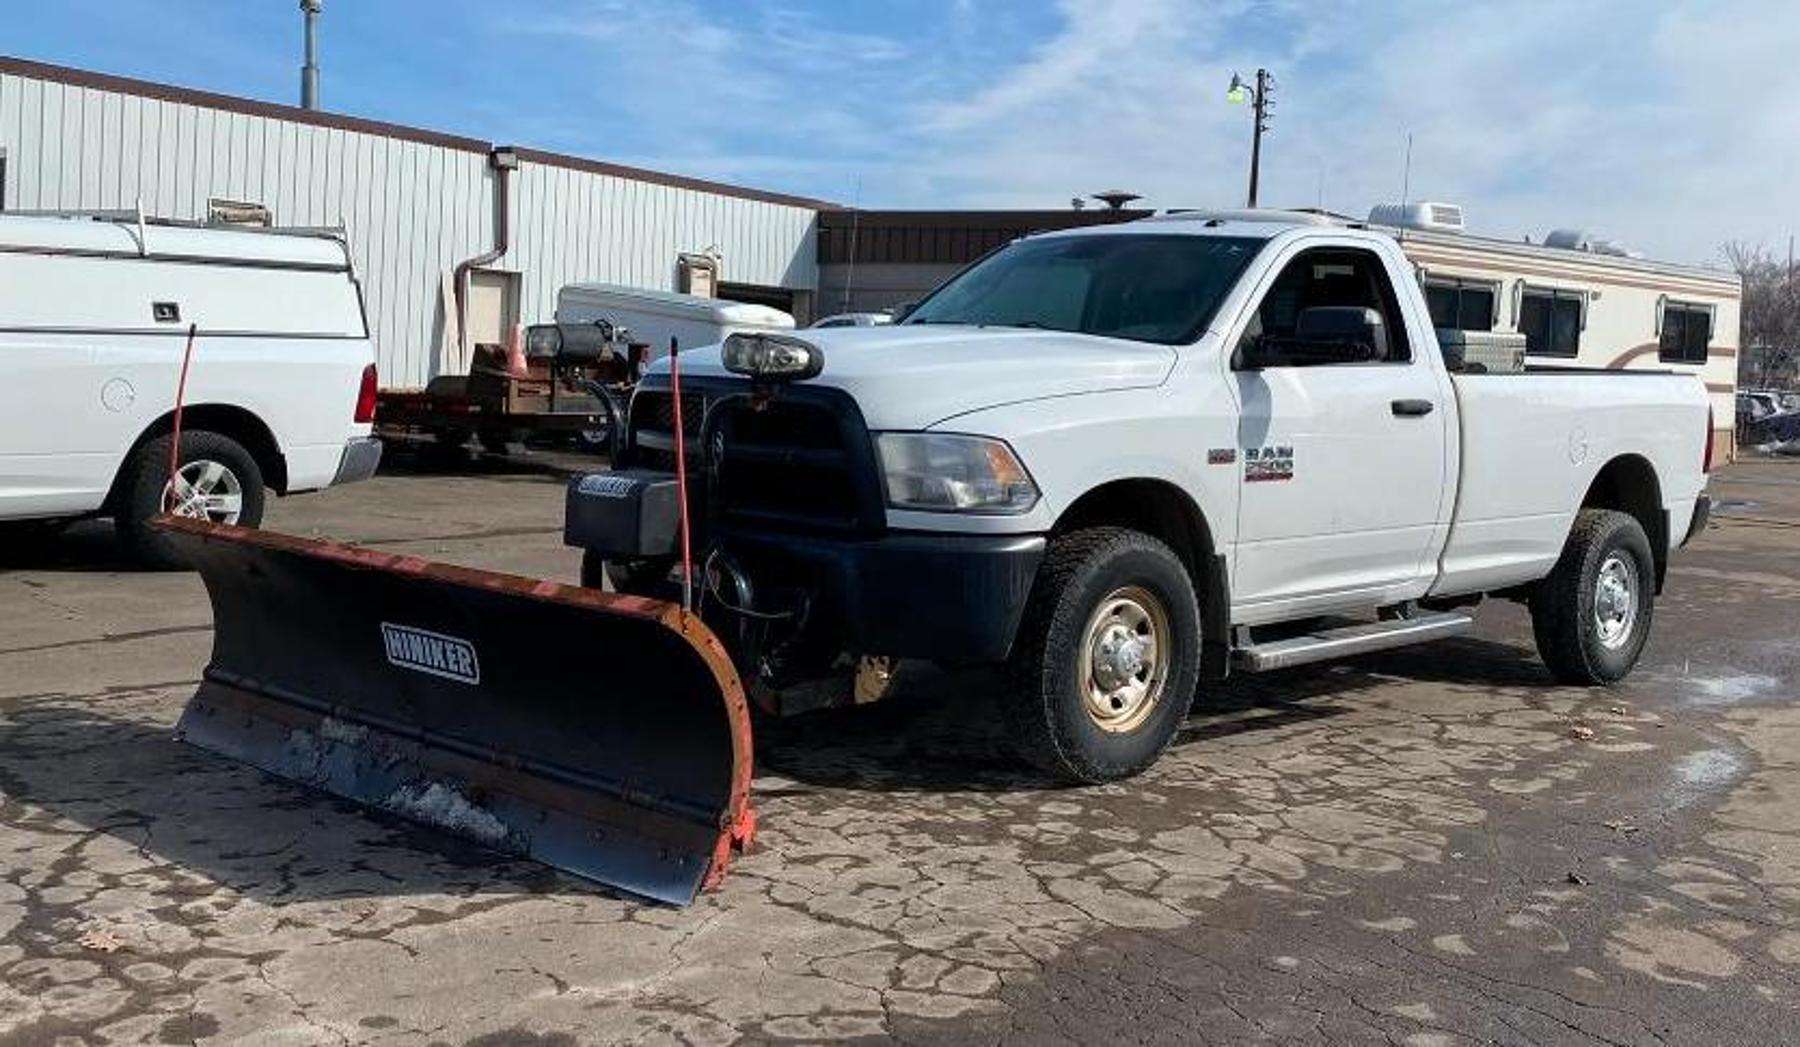 2014 Dodge Ram 2500 With Plow & (2) Riding Lawn Mowers